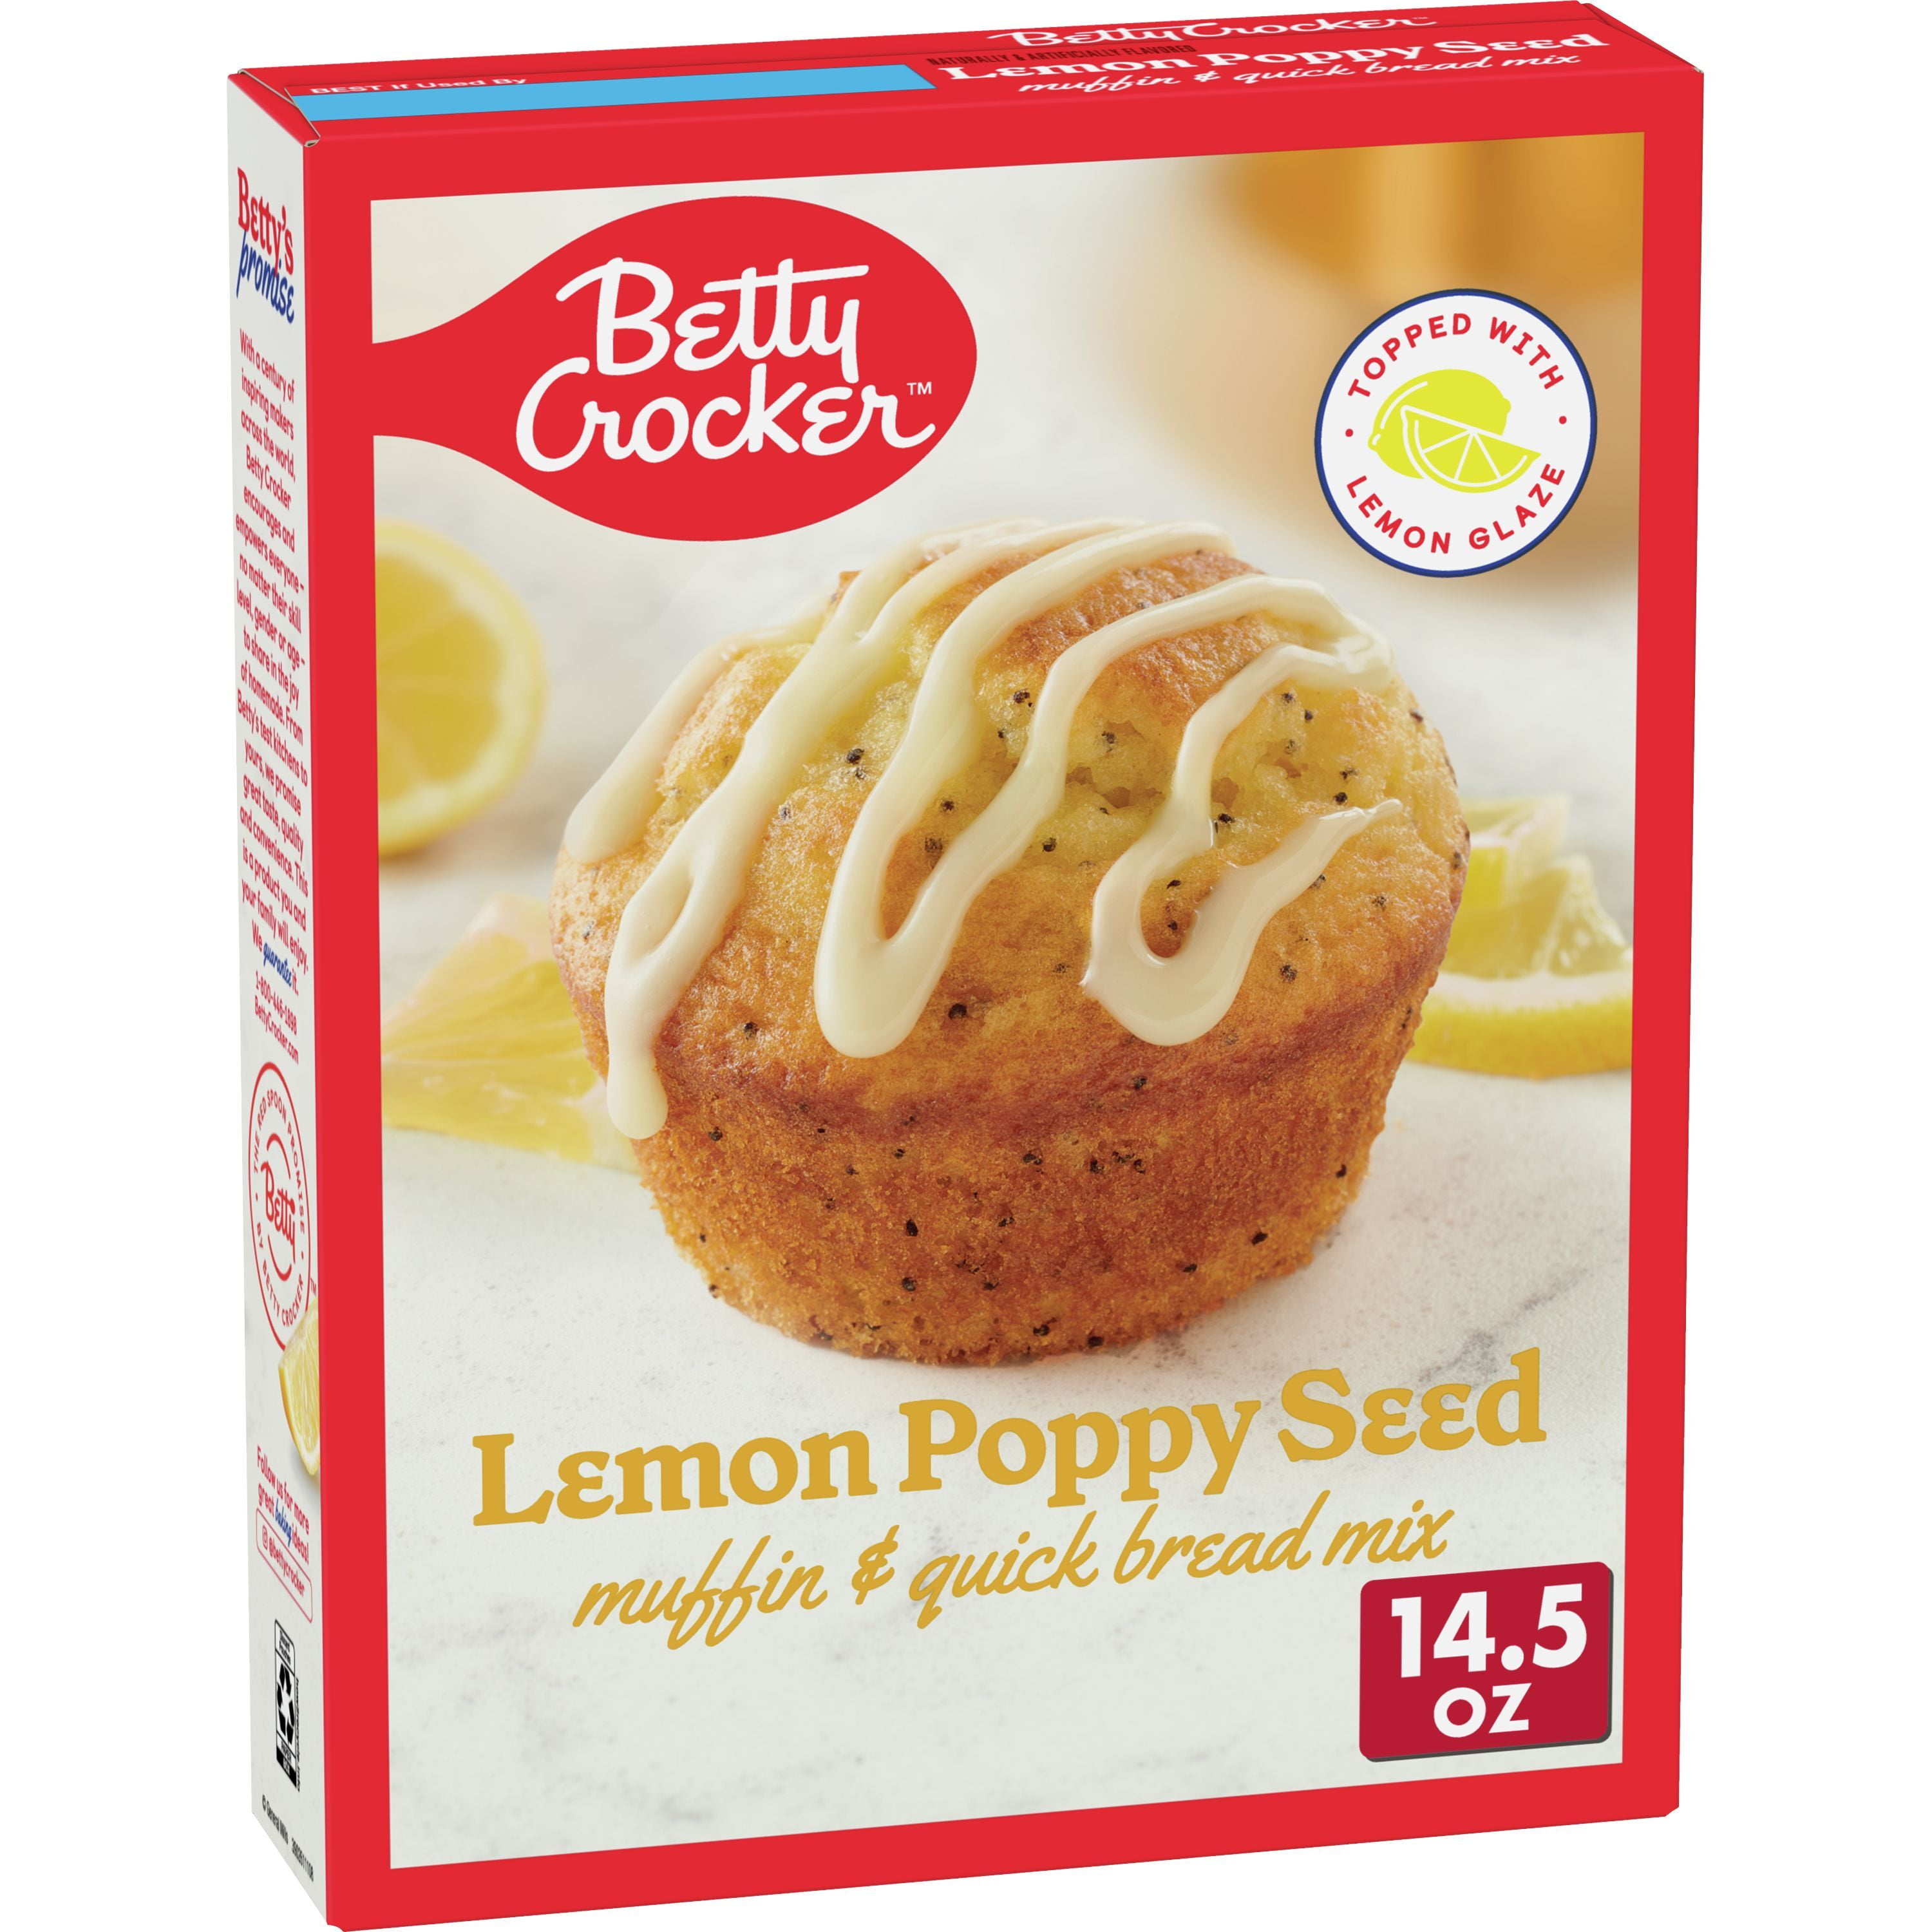 Betty Crocker Lemon Poppy Seed Muffin and Quick Bread Mix Topped With Lemon Glaze, 14.5 oz.